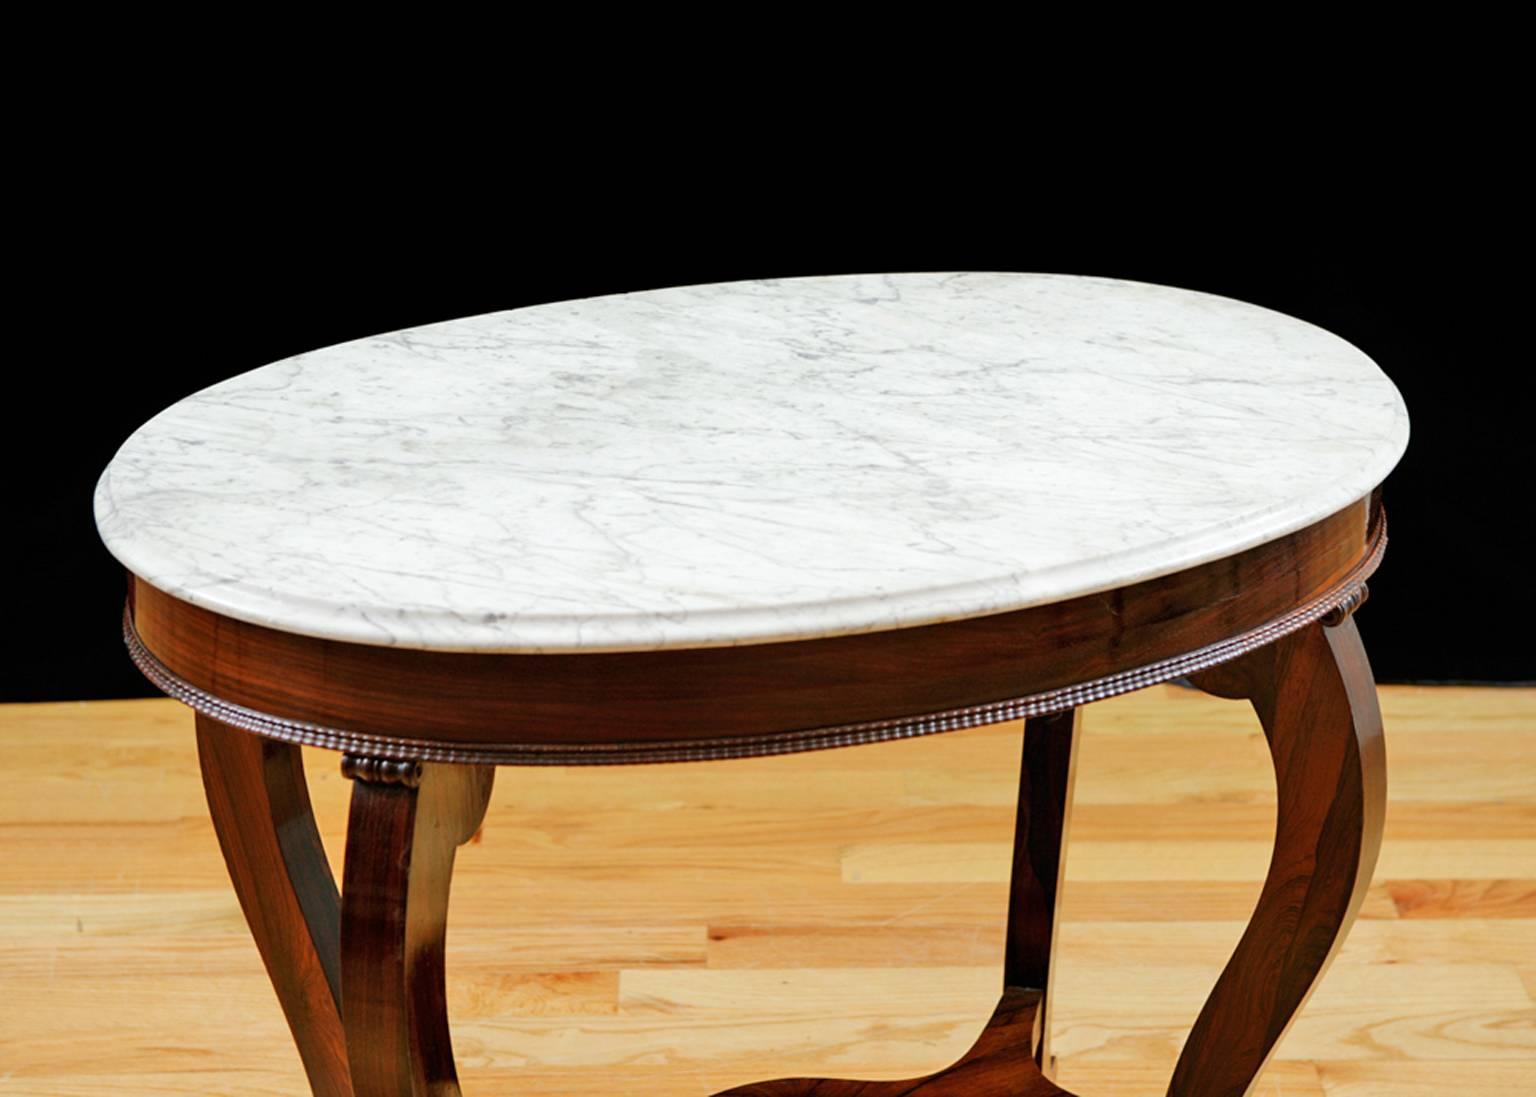 A graceful table with quiet refinement made of the finest rosewood, with the original white Carrara-marble top. Oval top with carved trim on apron is on cabriolet legs with scroll feet joined by a bottom stretcher, and rests on casters for mobility.